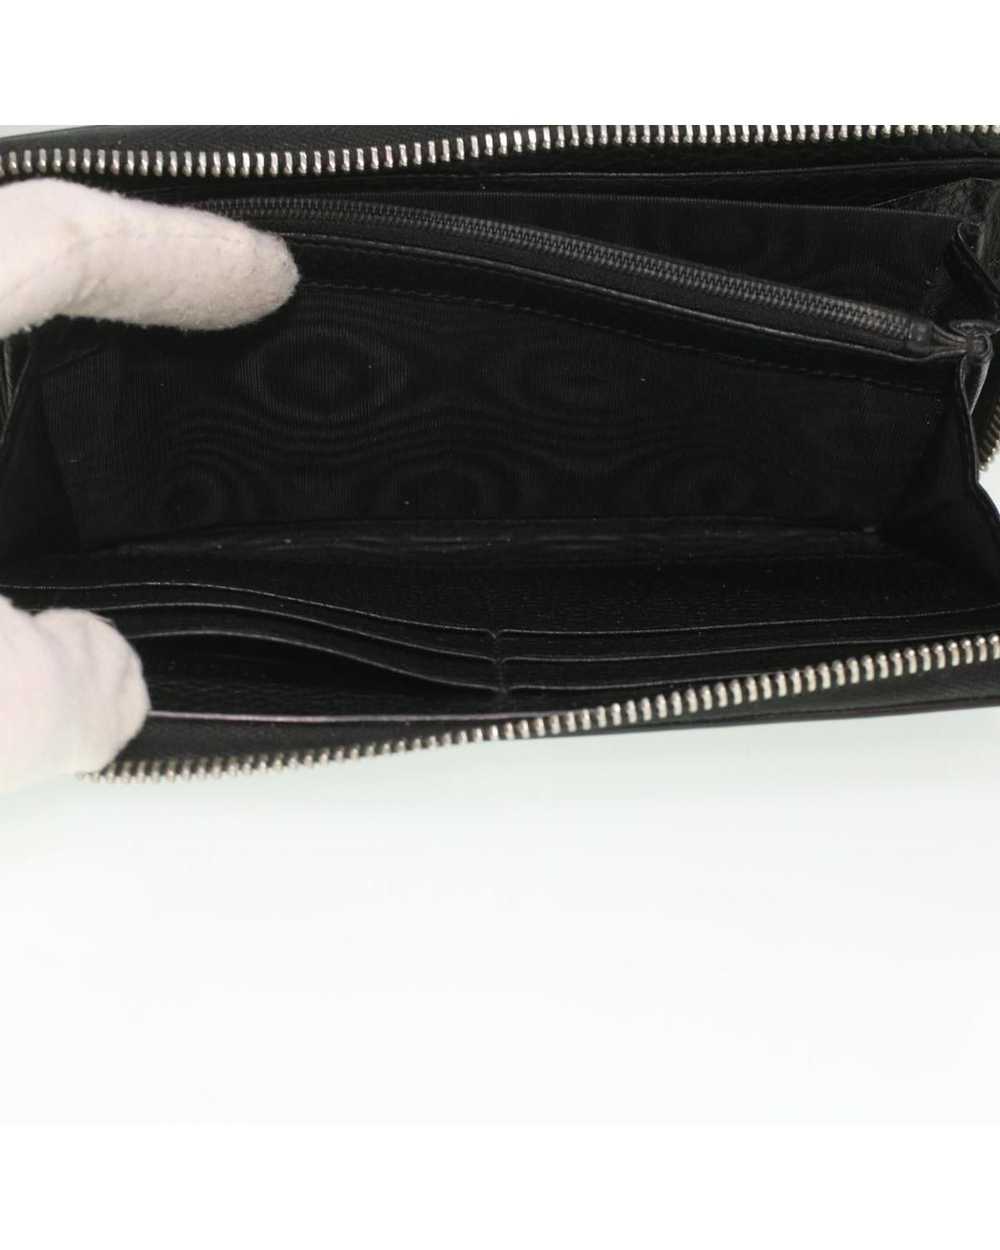 Gucci Black Leather Long Wallet by Gucci 473928 - image 9